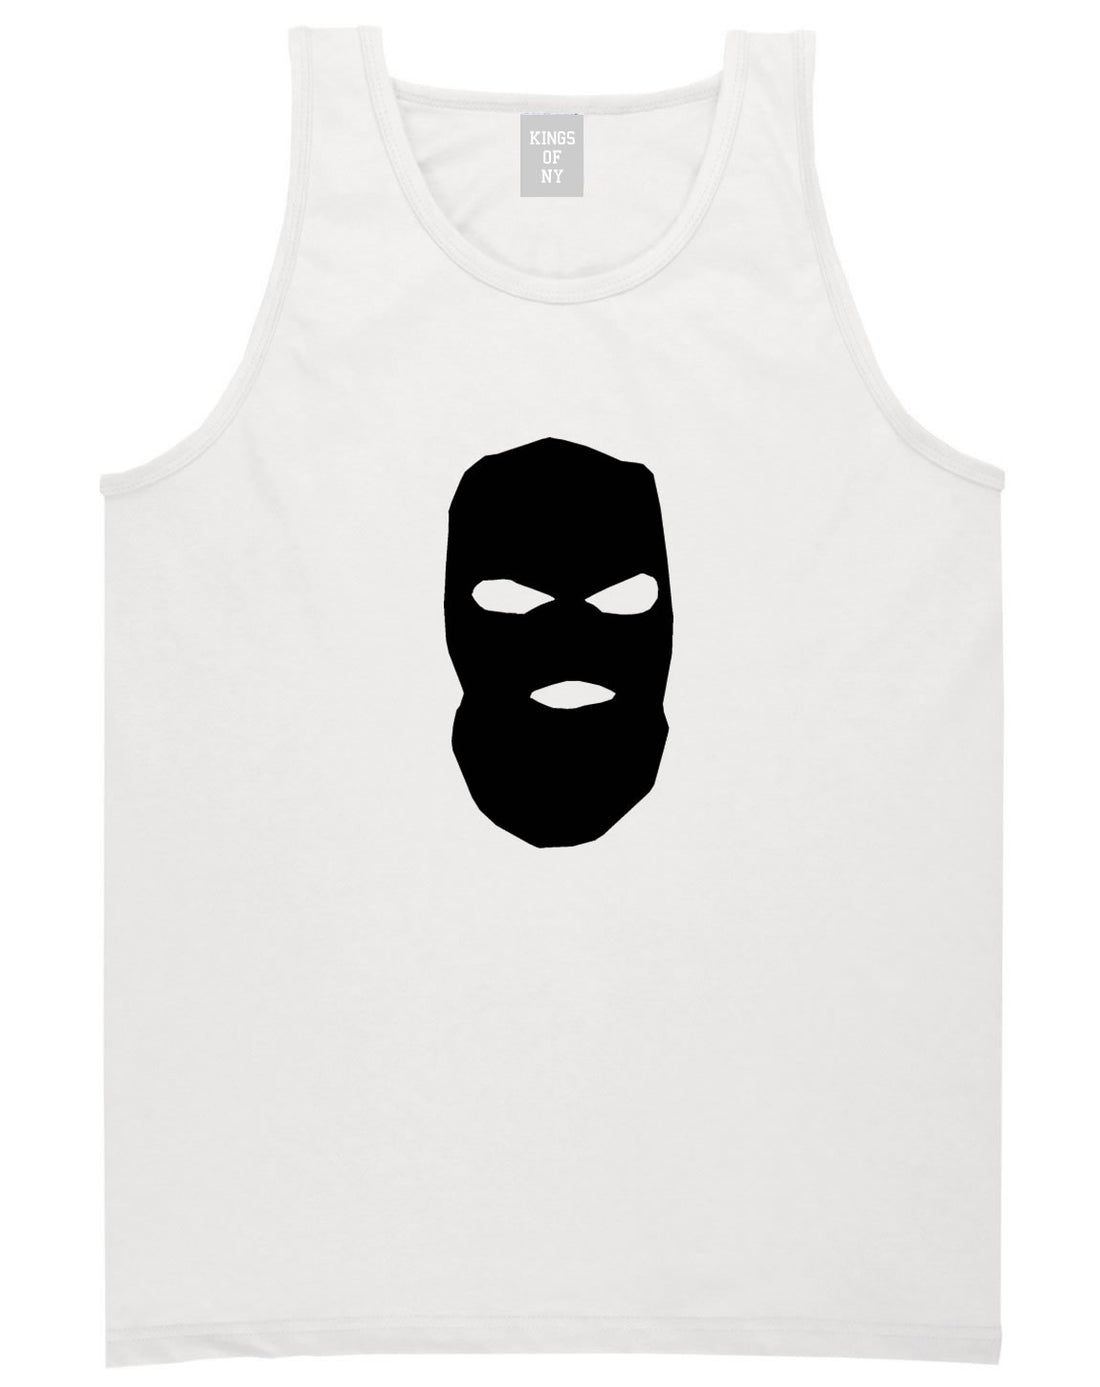 Ski Mask Way Robber Tank Top in White By Kings Of NY